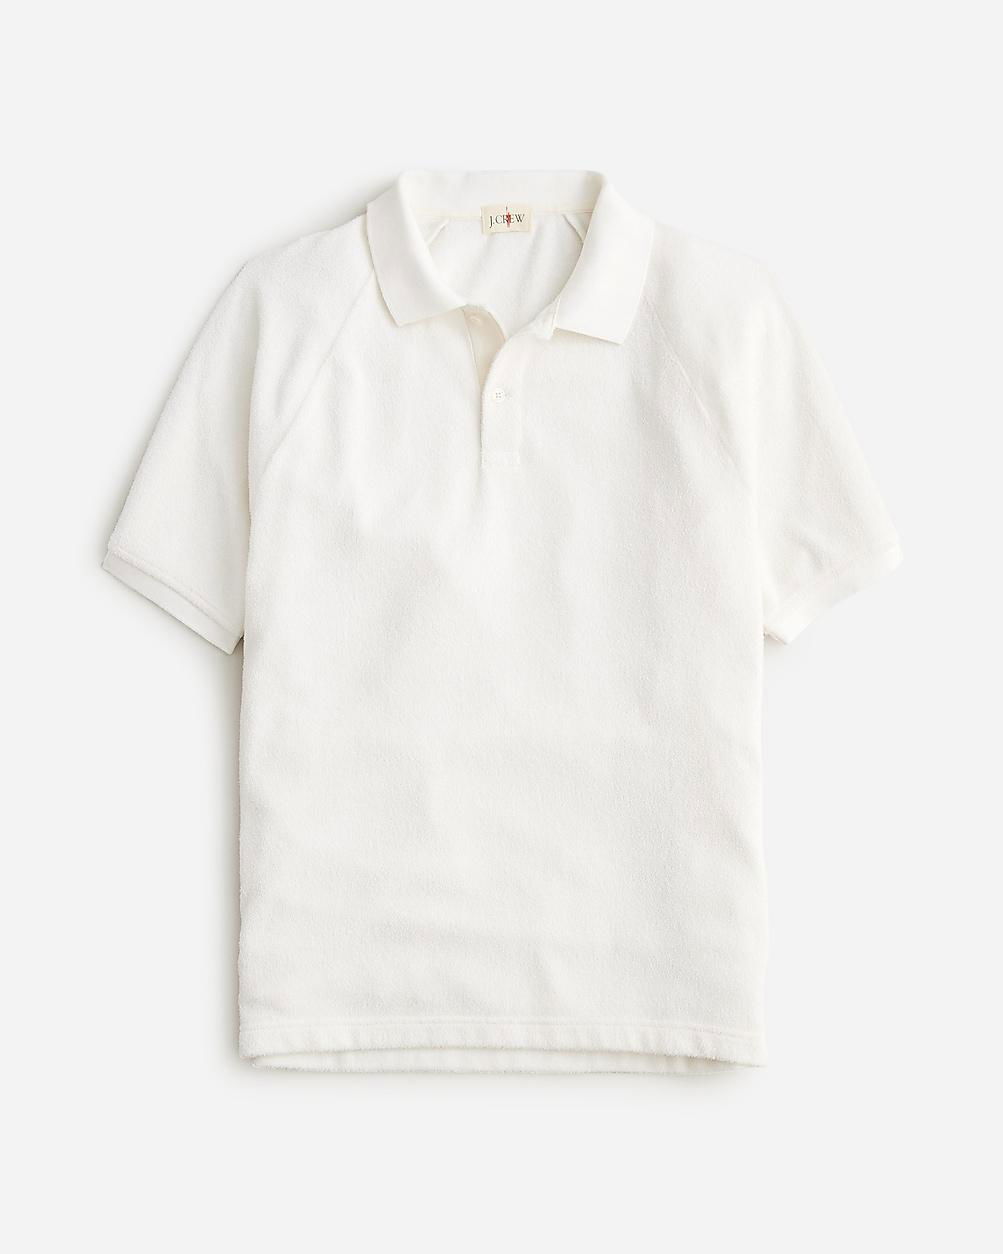 Terry cloth polo shirt by J.CREW